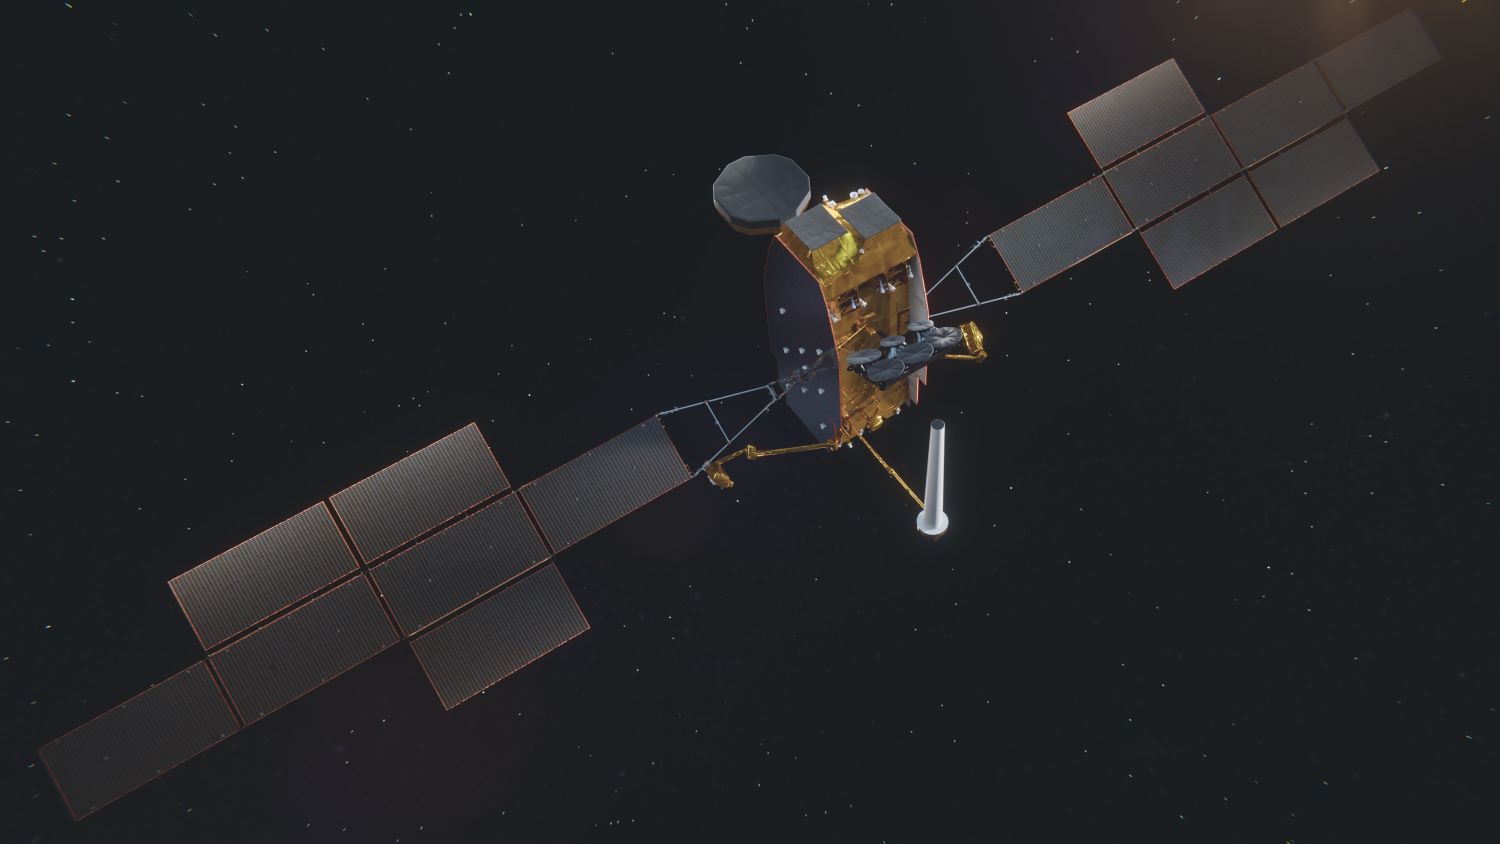 Artist's impression of Airbus Eurostar Neo, the satellite which will carry antennas and developed by the Pacis 3 project. Image credit: ESA